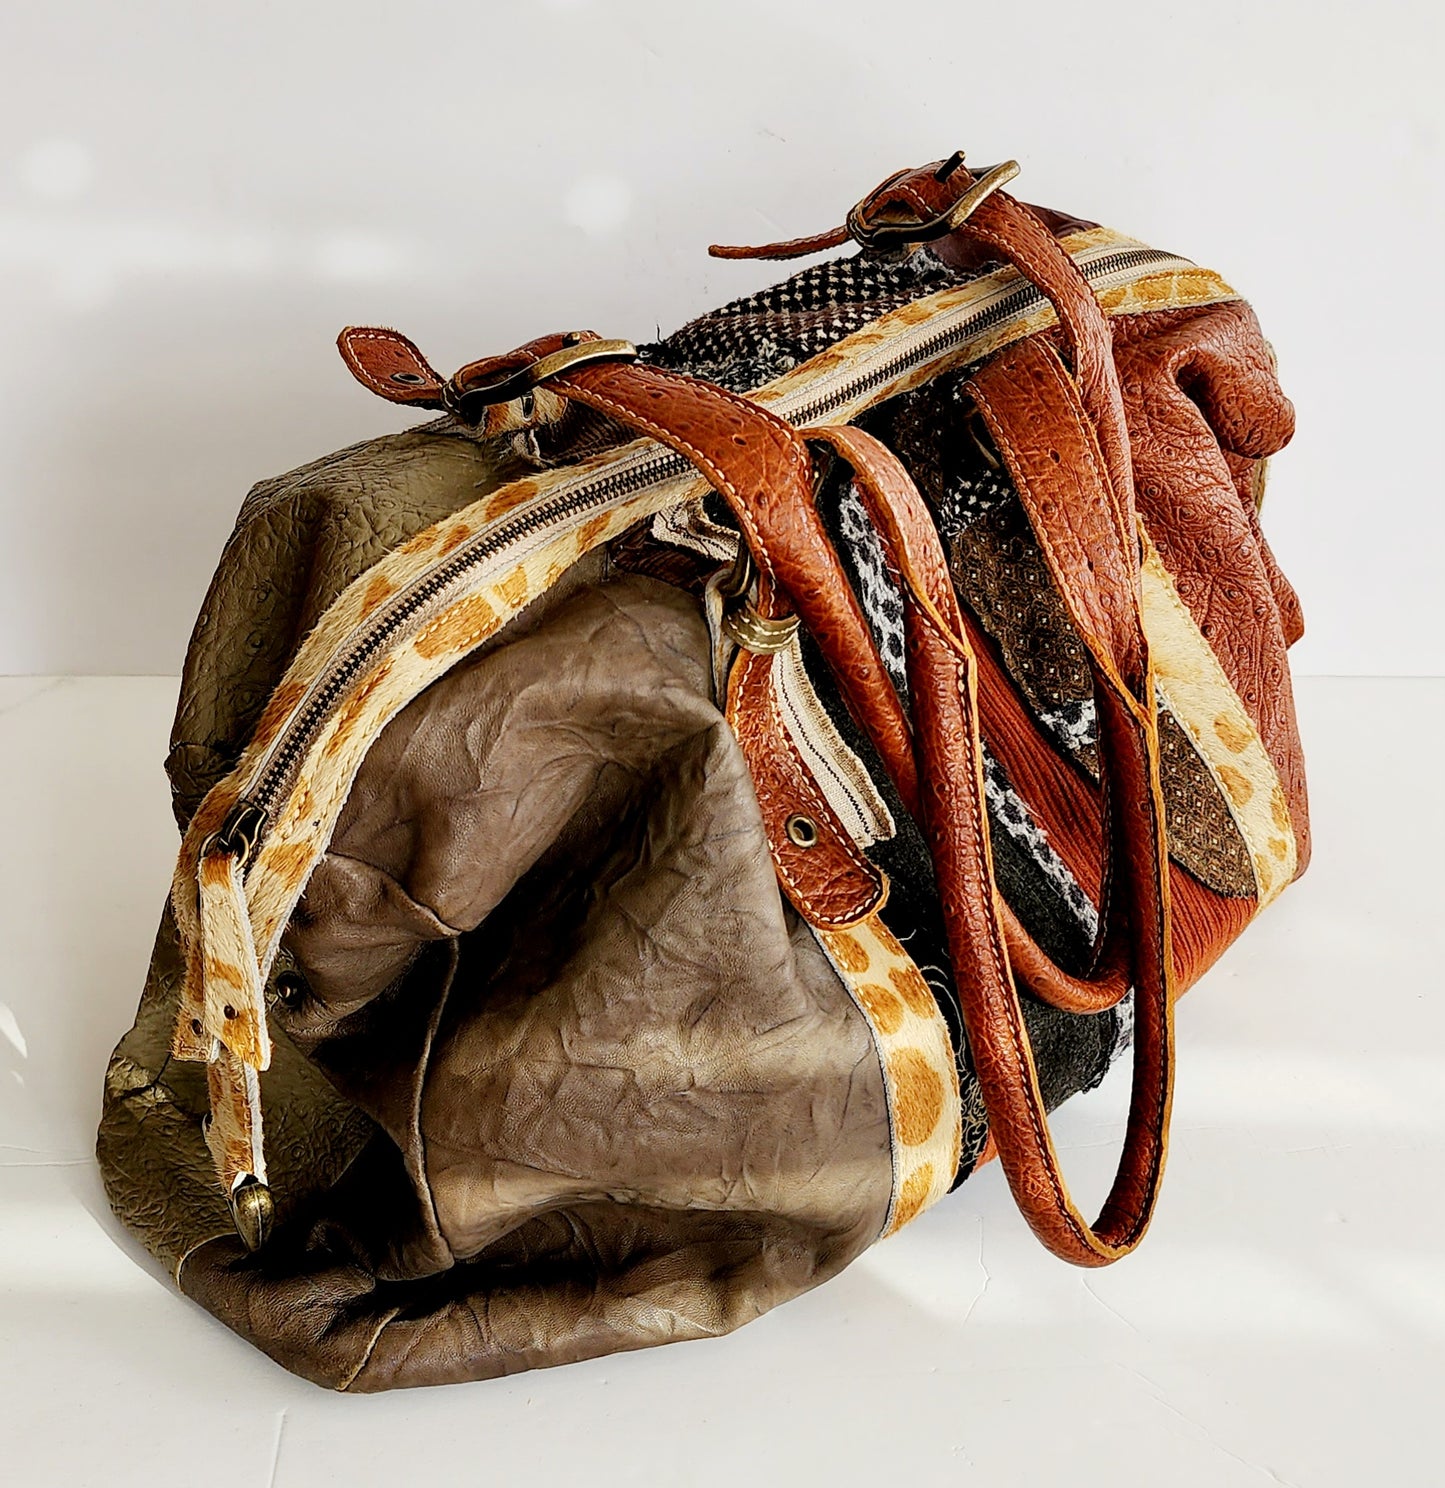 Handmade Patchwork Duffle Bag in Leather & Fabric by Frankie Slaughter